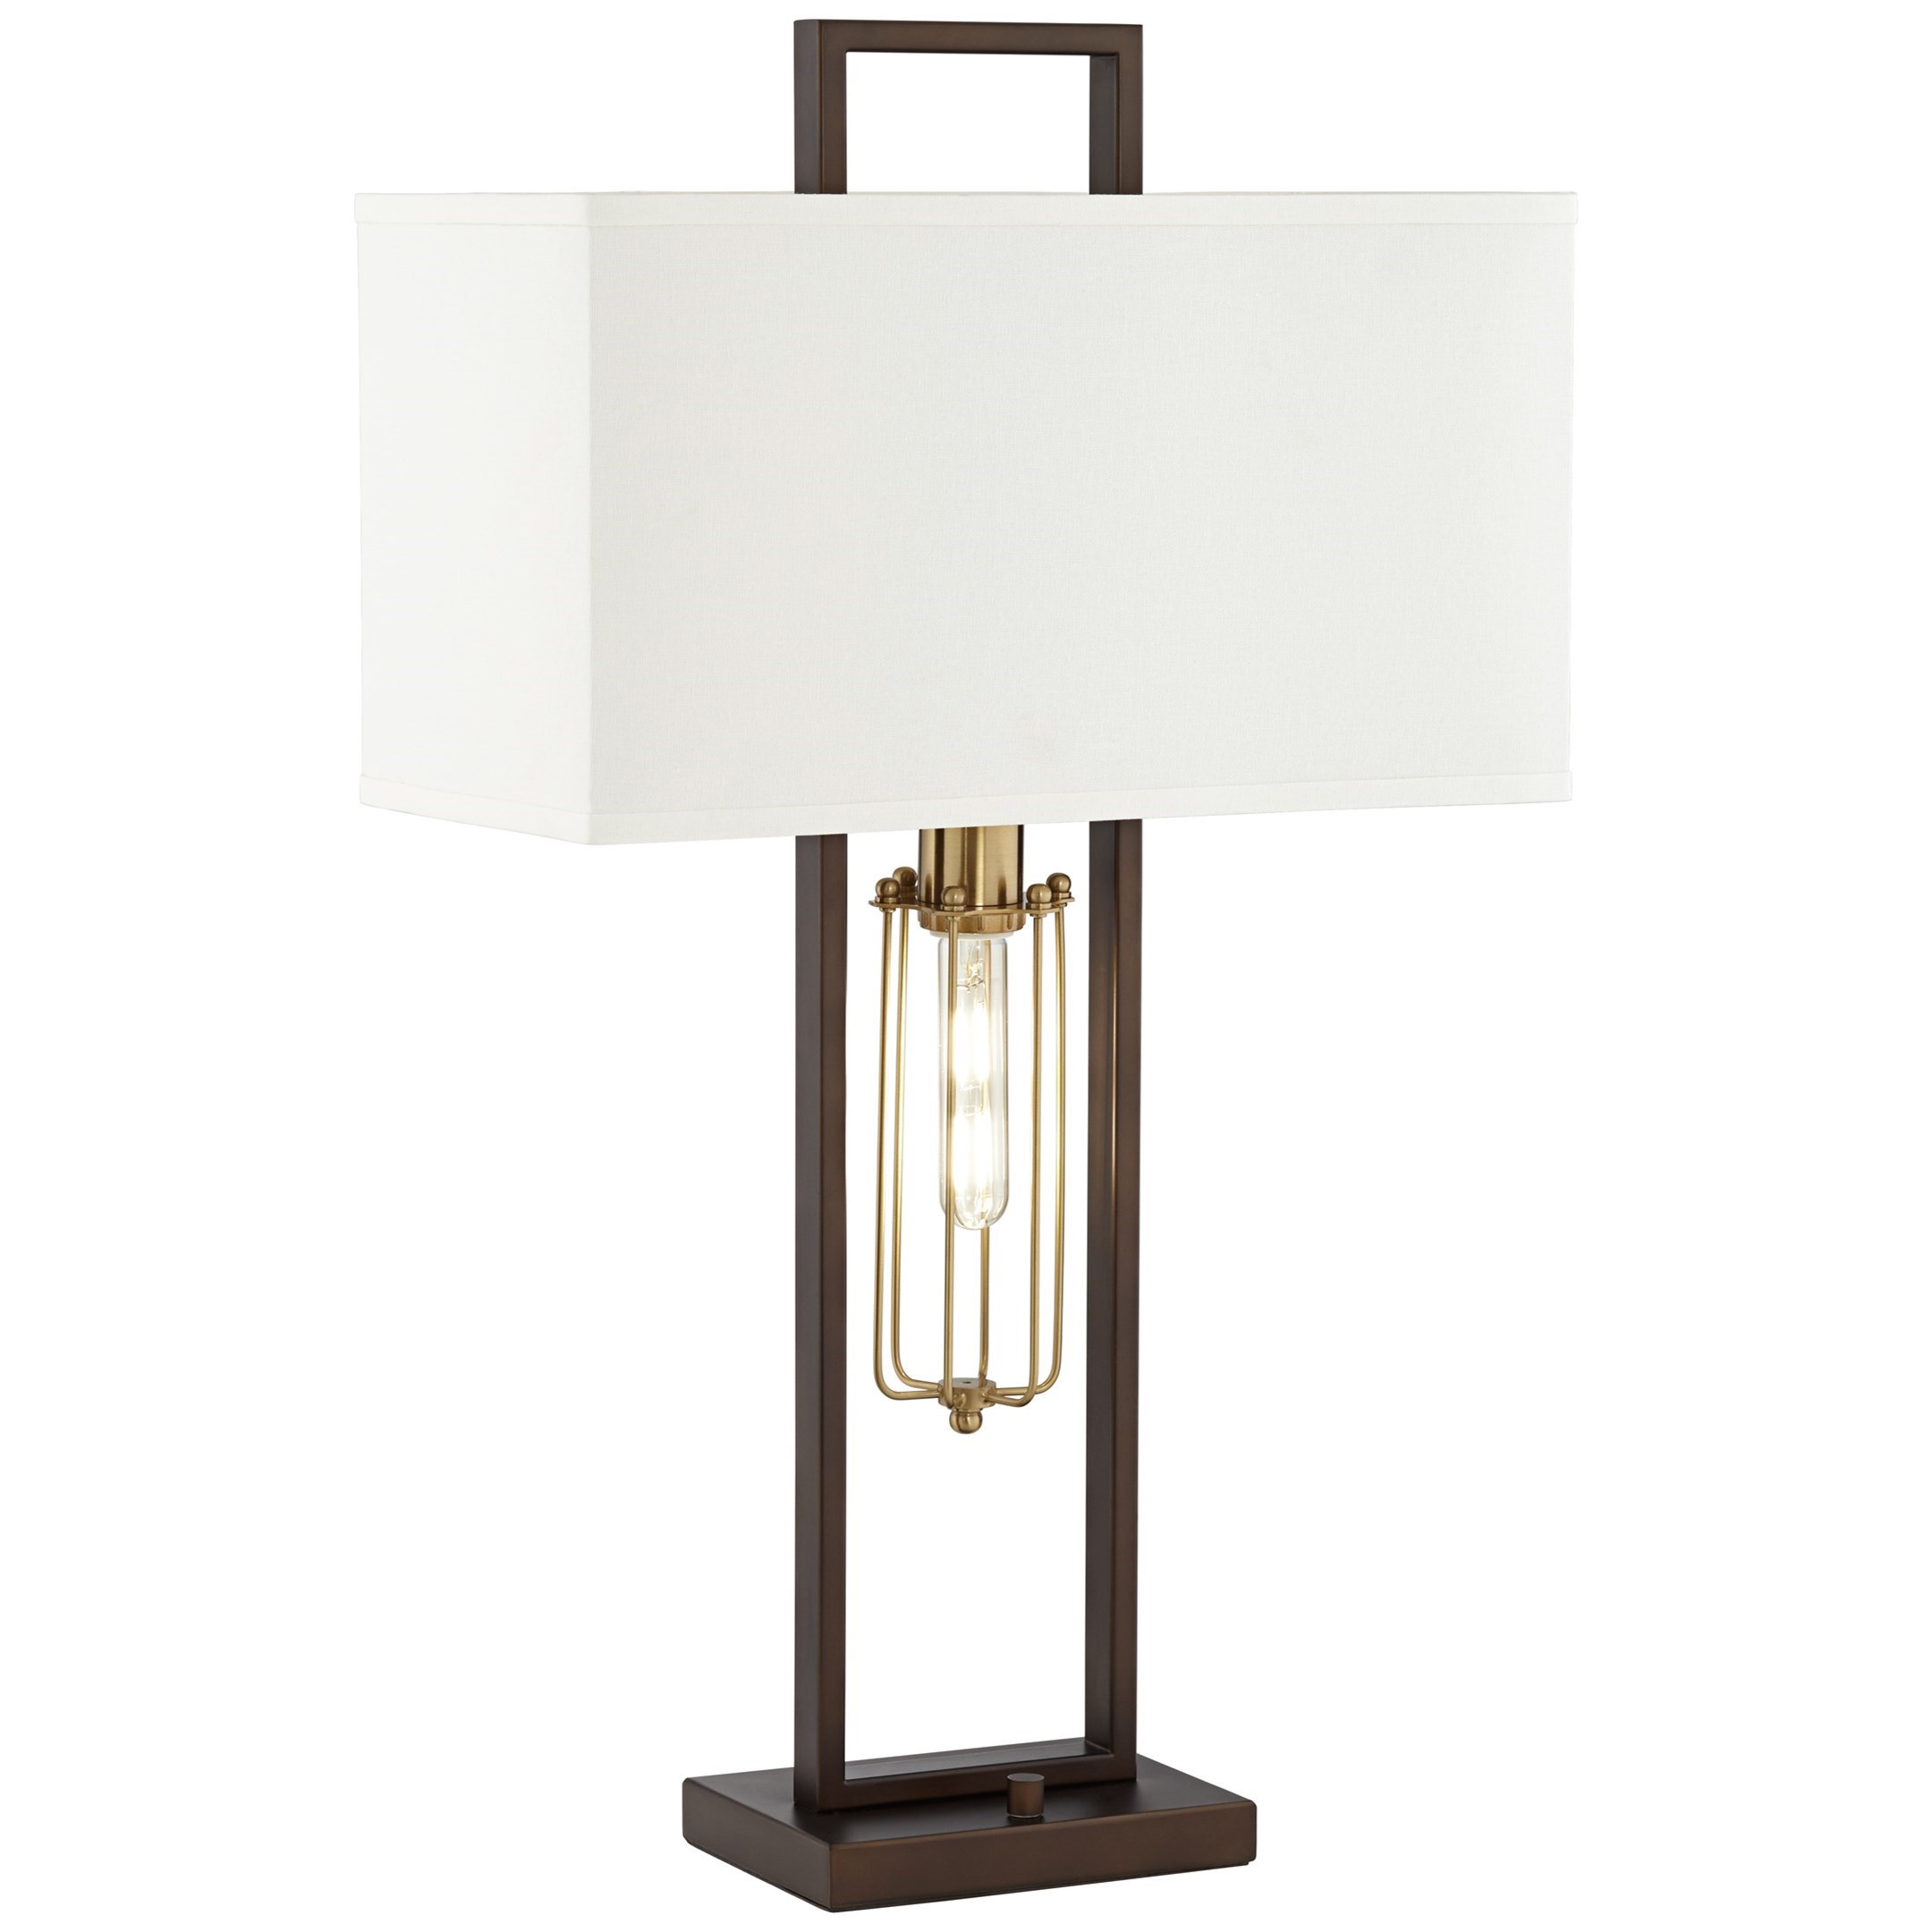 oblong table lamp shades